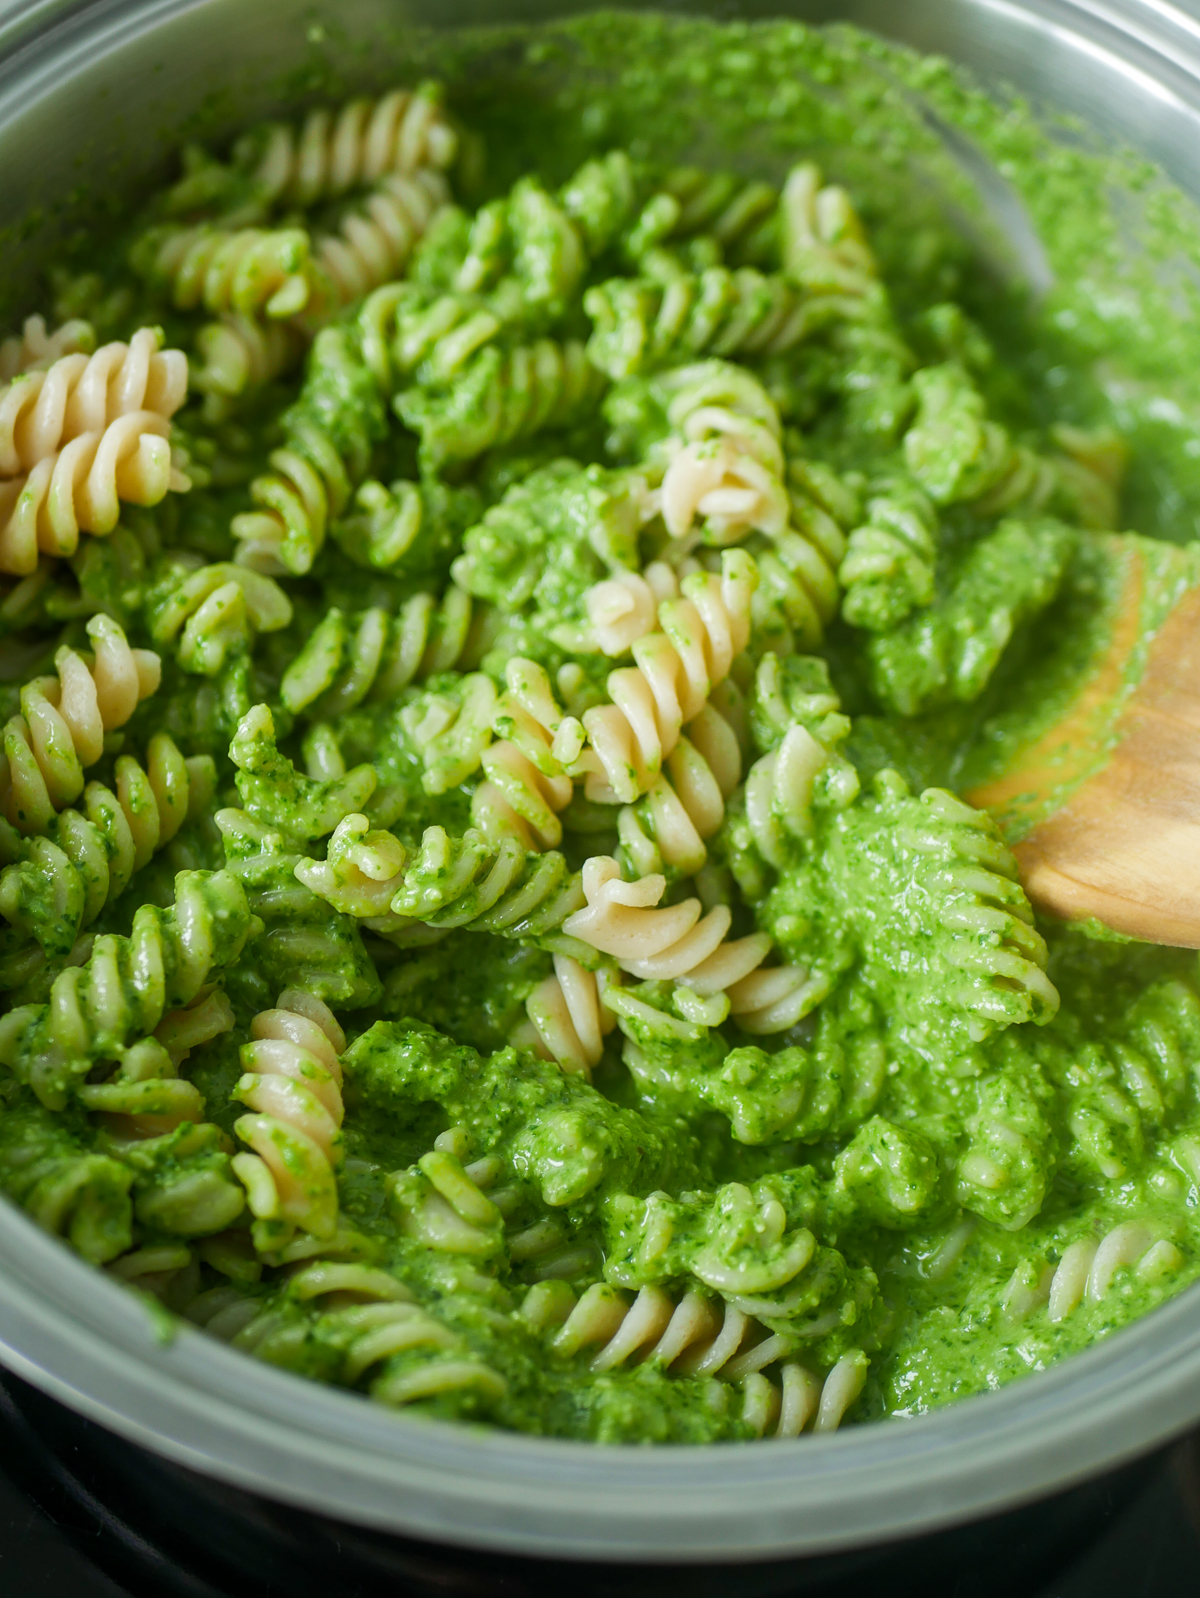 white fusilli in a suacepan mixed with a green pasta sauce